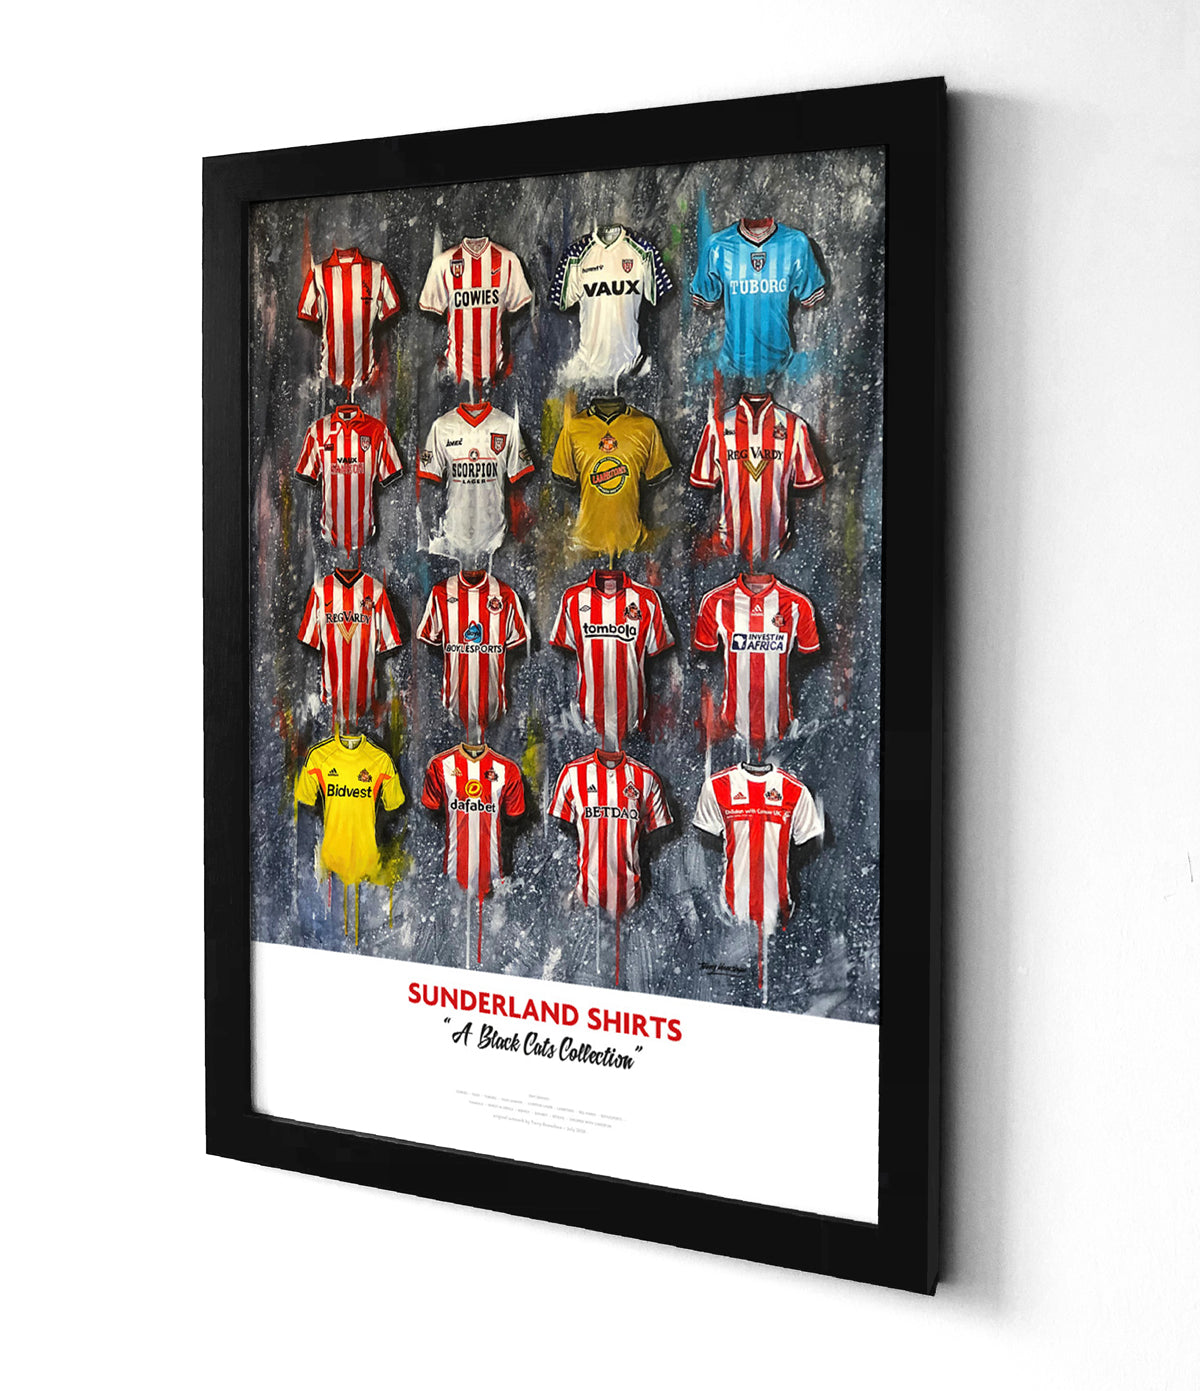 This personalized A2 limited edition print artwork by Terry Kneeshaw features 16 iconic Sunderland team shirts. The artwork showcases the history of the Sunderland team through its jerseys, including the classic red and white striped shirts. Each jersey is distinct and unique, representing a different era in the club's history. This artwork is a must-have for any die-hard Sunderland fan, as it captures the rich and storied tradition of this historic football club.